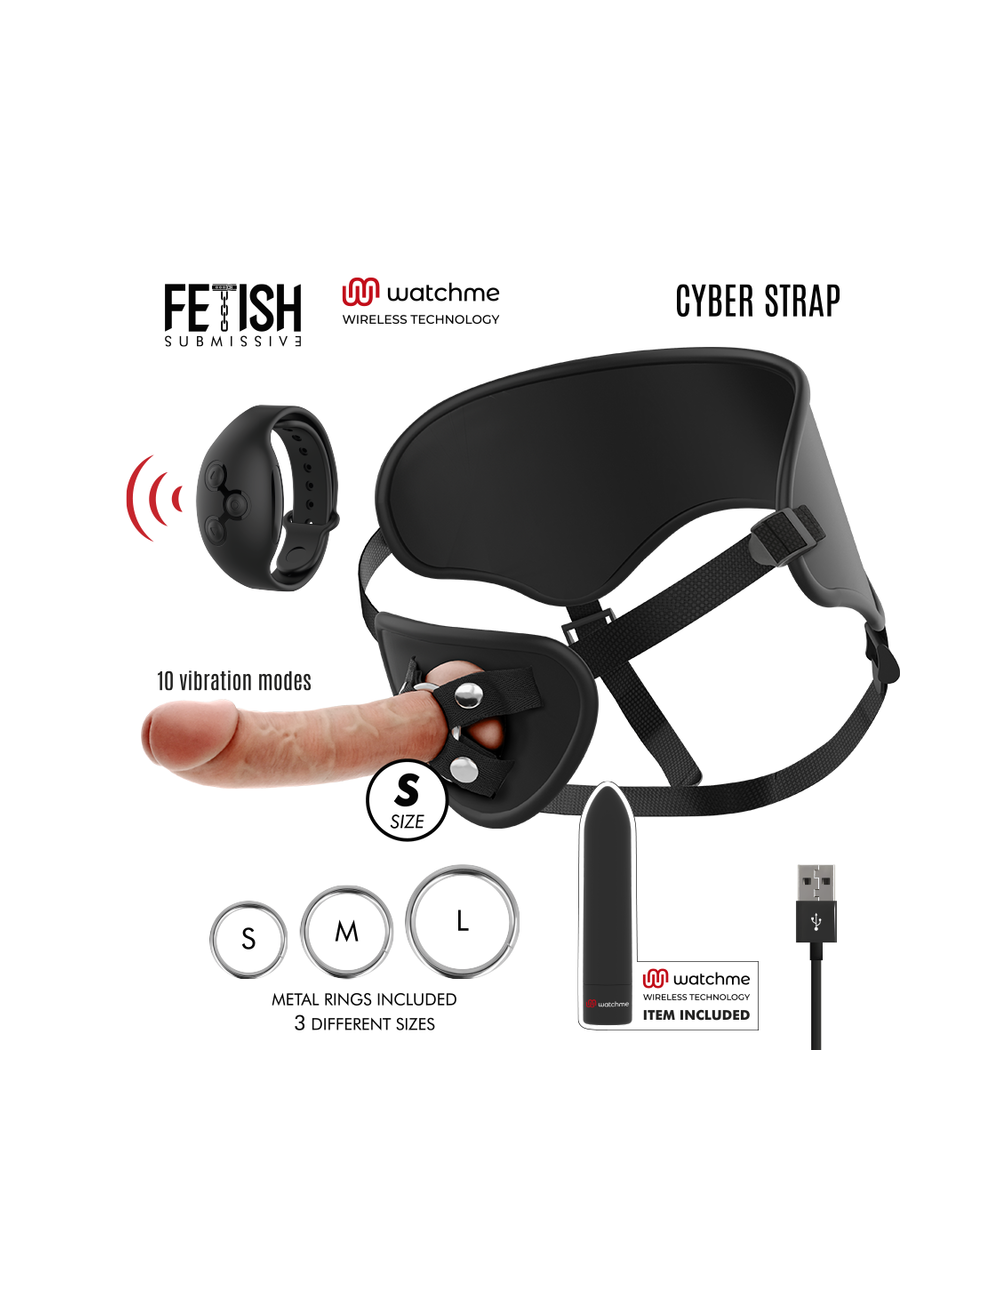 Sextoys - Accessoires - CYBER STRAP REMOTE CONTROL HARNESS AND VIBRATING BULLET WATCME TECHNOLOGY S - FETISH SUBMISSIVE CYBER...